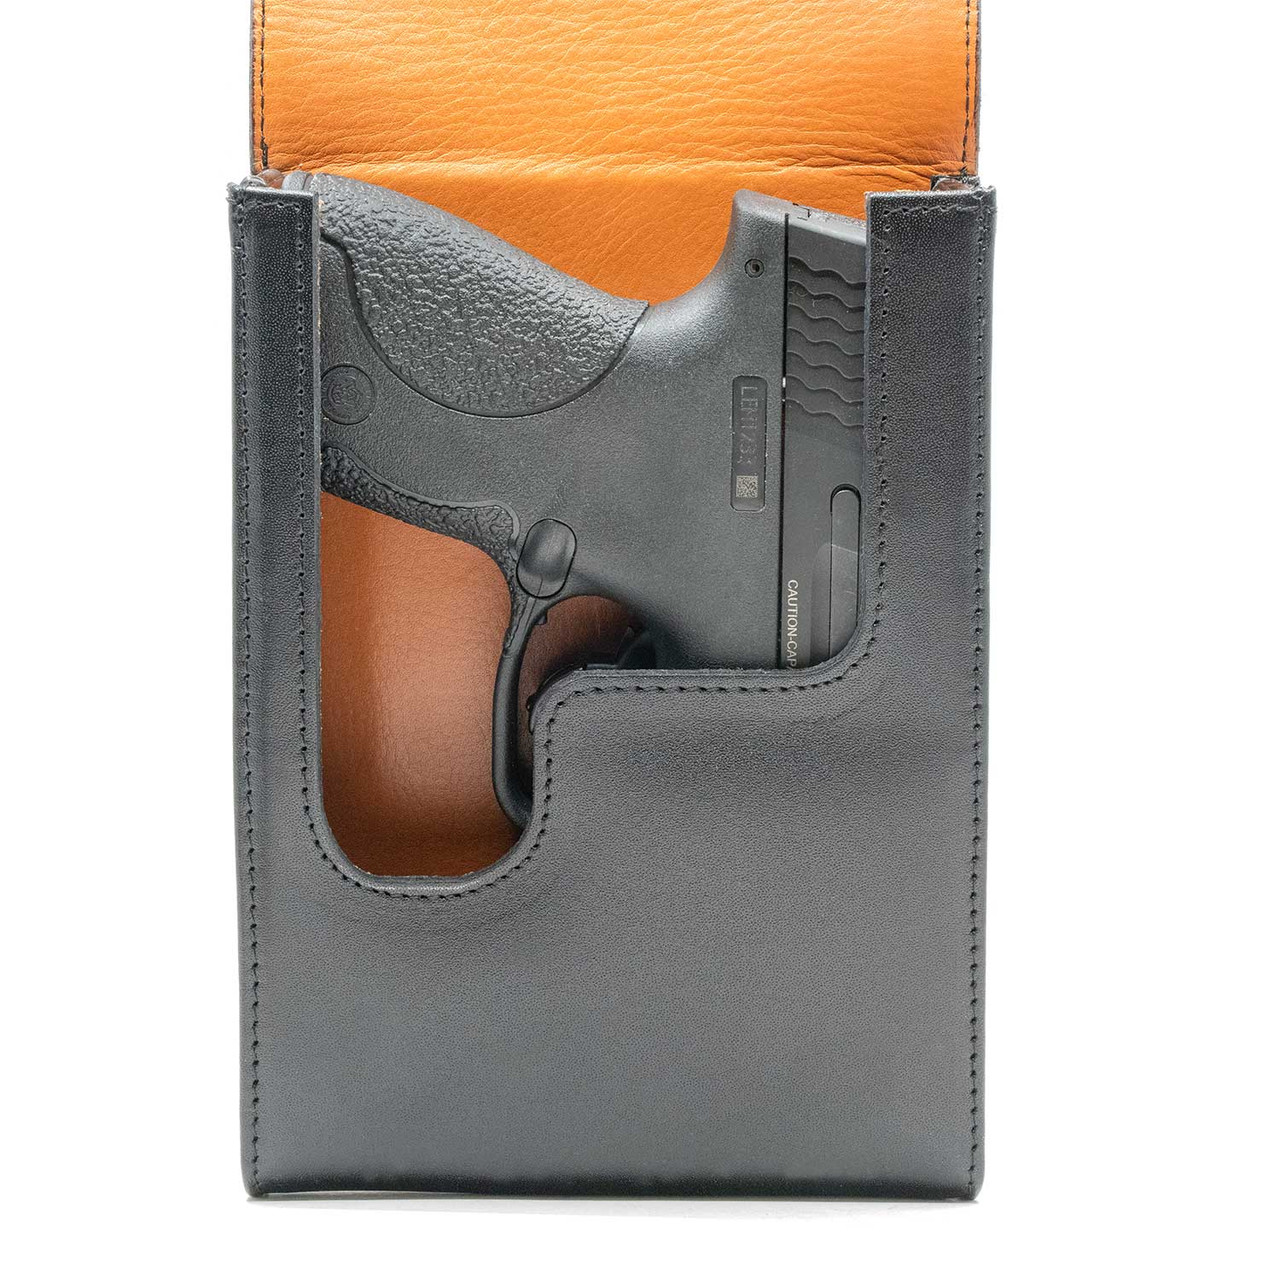 The Keltec PF9 Xtra Mag Black Leather Holster